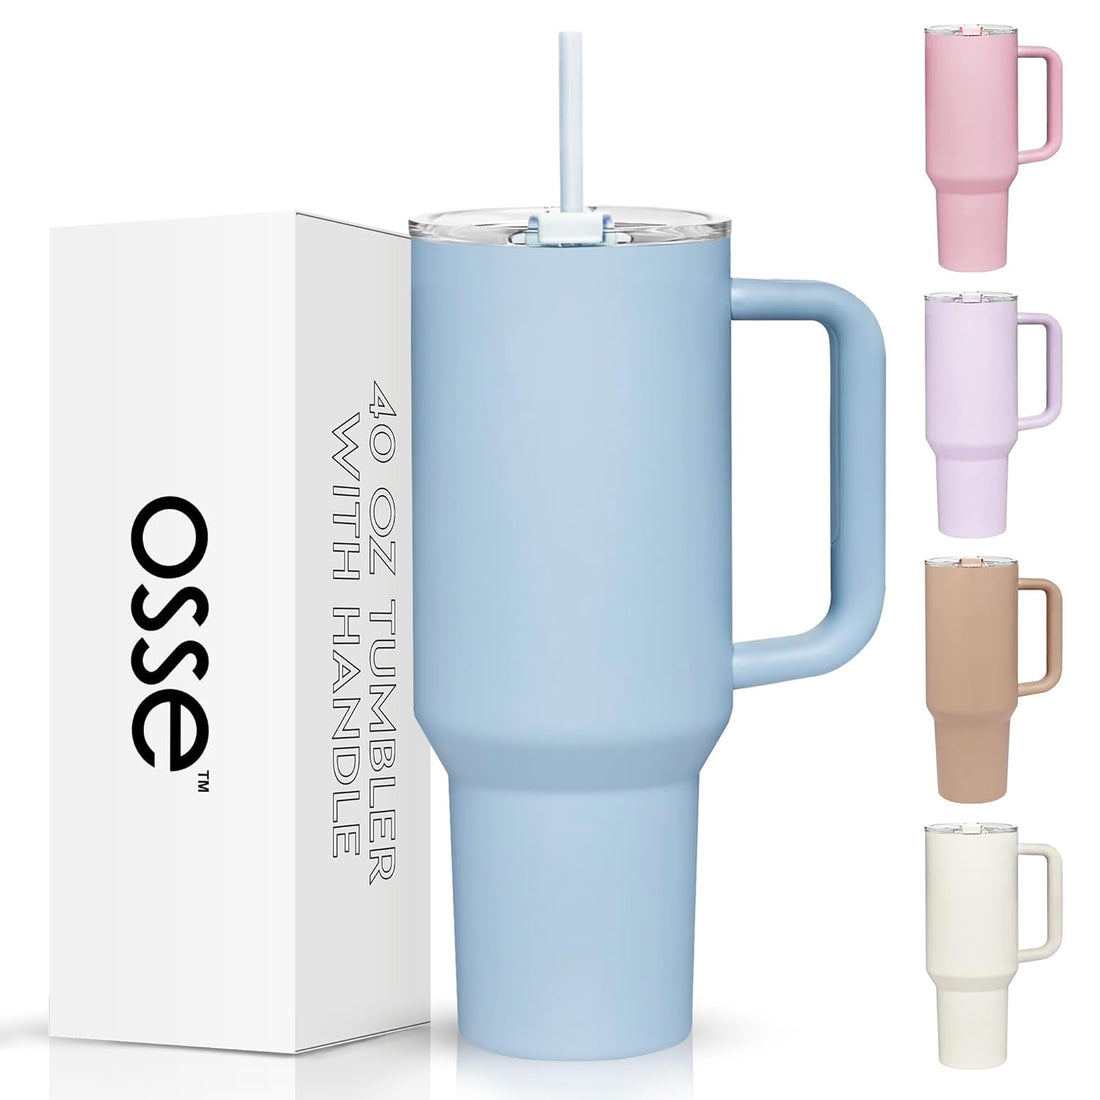 osse 40oz Tumbler with Handle and Straw Lid | Double Wall Vacuum Reusable Stainless Steel Insulated Water Bottle Travel Mug Cup | Modern Insulated Tumblers Cupholder Friendly (Glacial Ice)